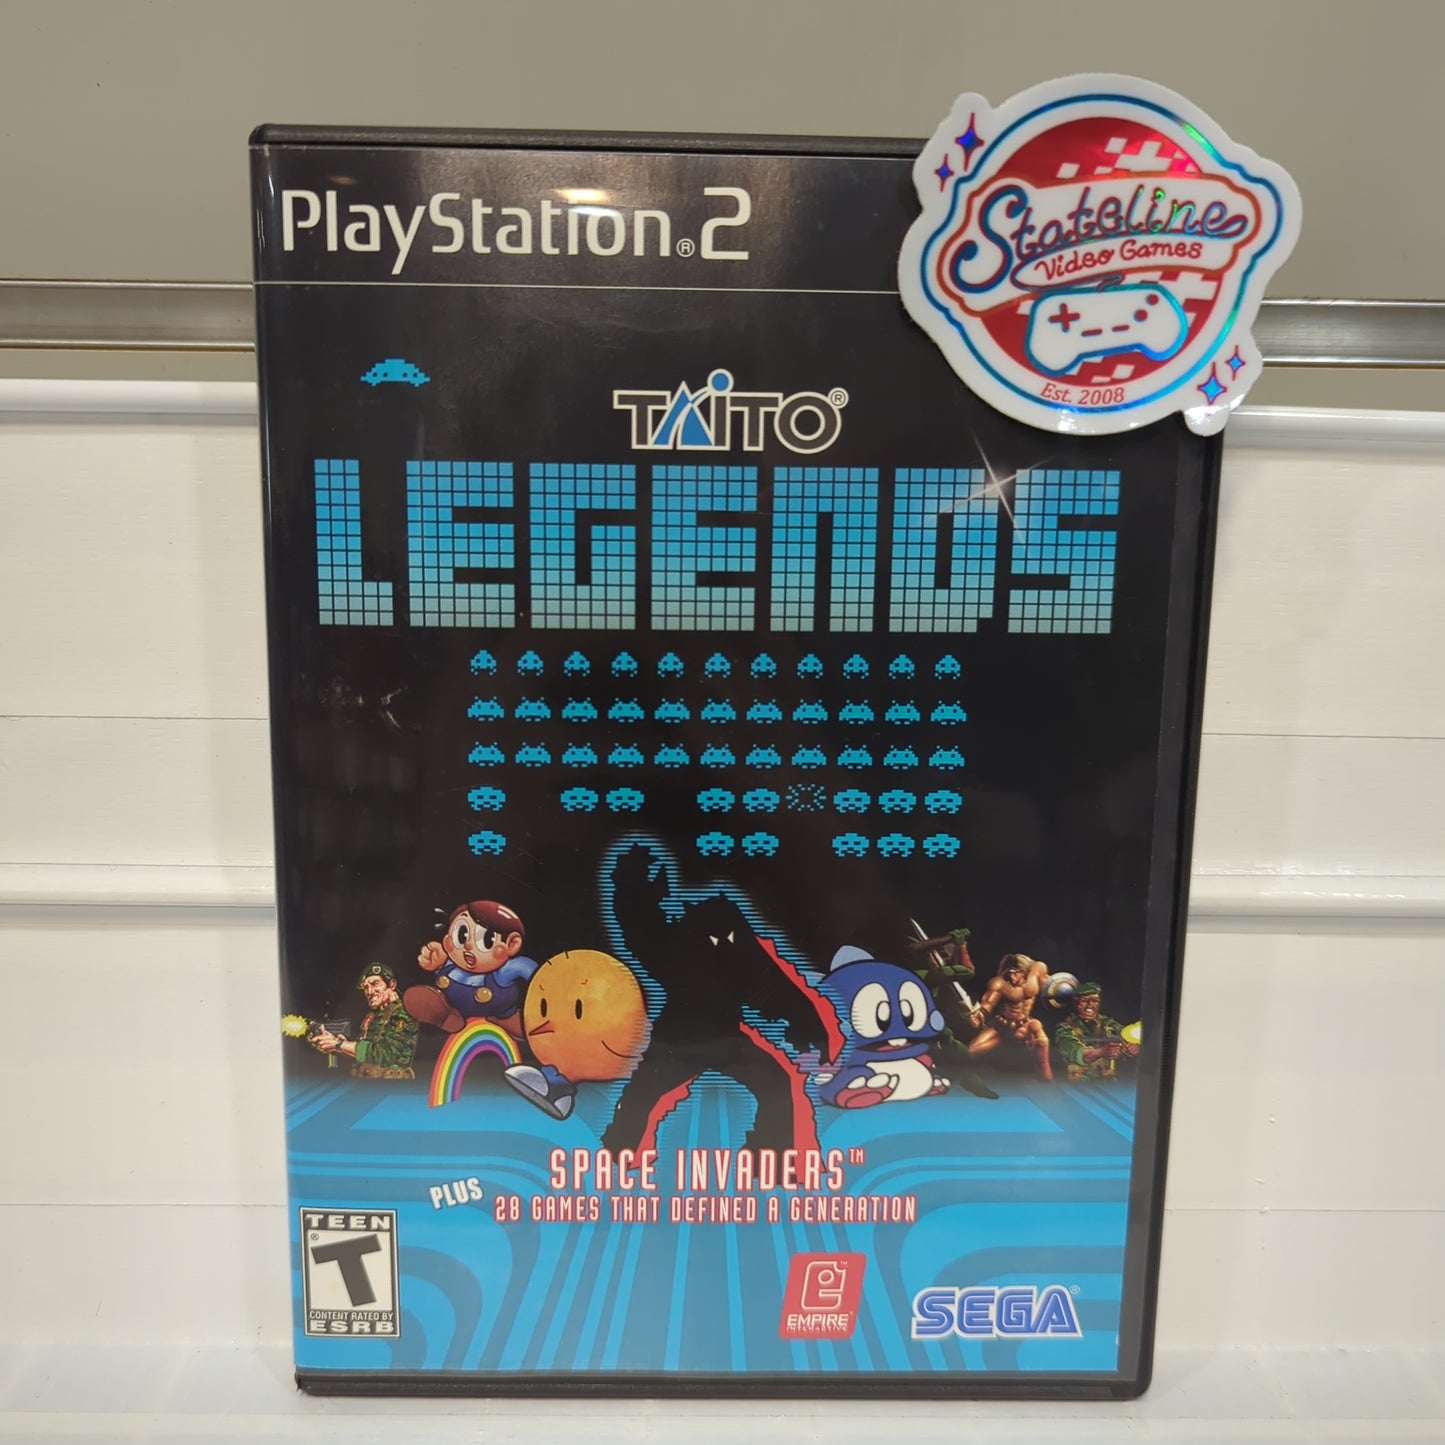 Taito Legends - Playstation 2